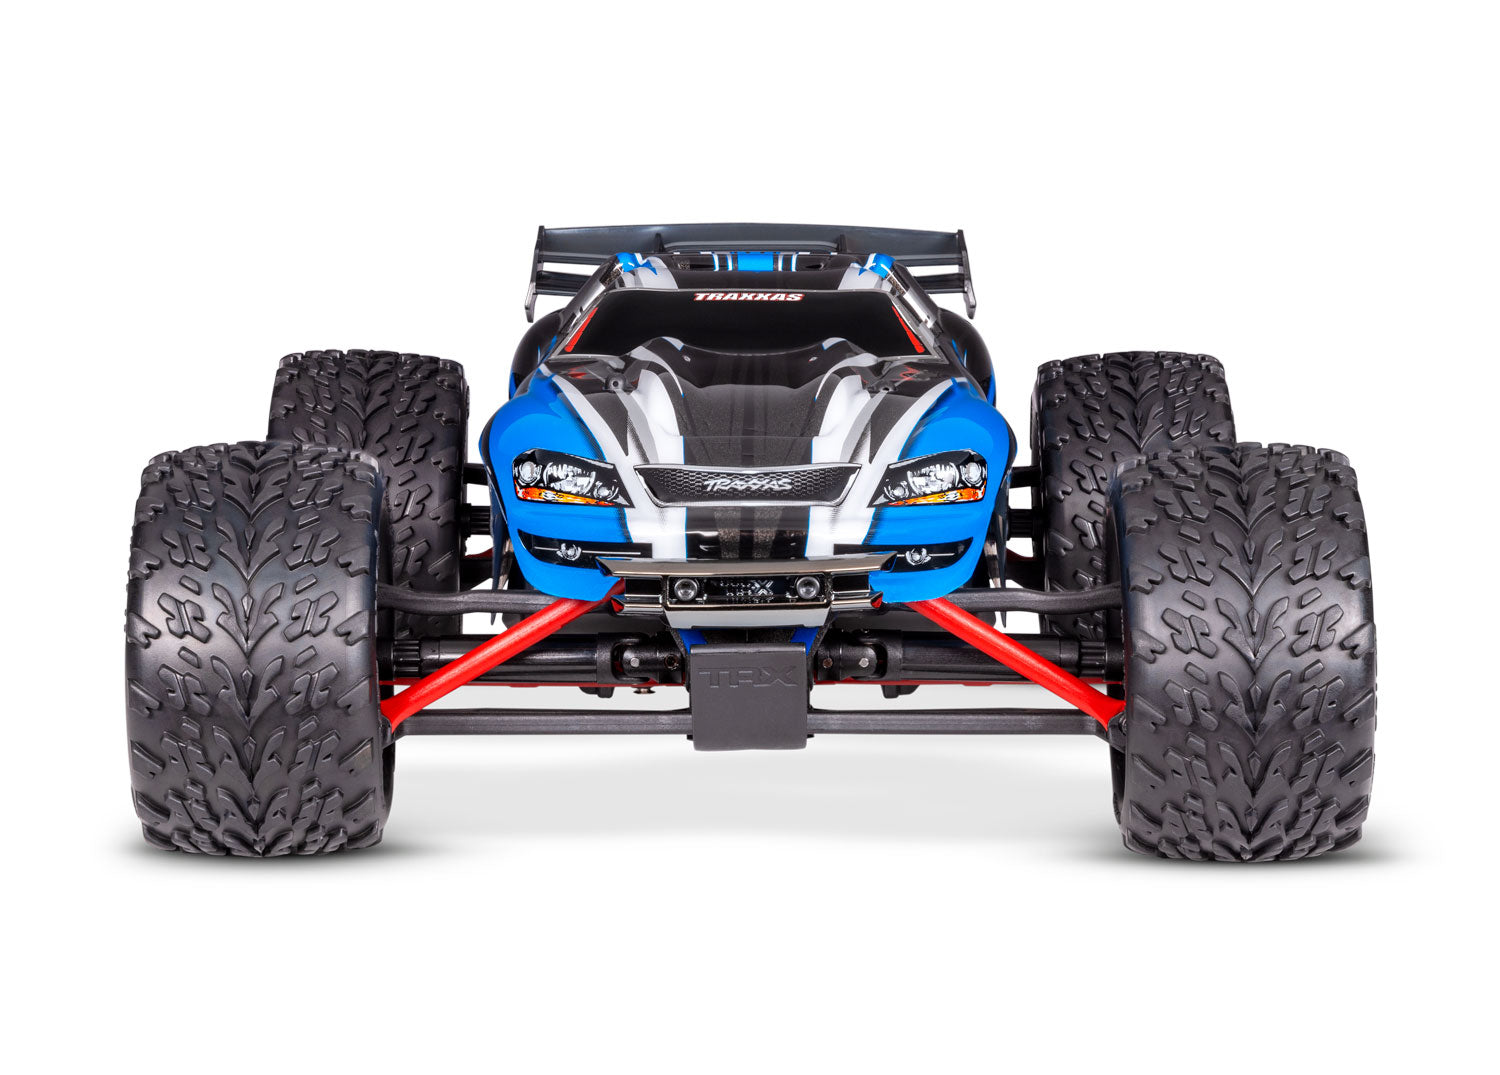 71054-8 Blue E-Revo®: 1/16-Scale 4WD Racing Monster Truck with TQ™ 2.4GHz Radio System